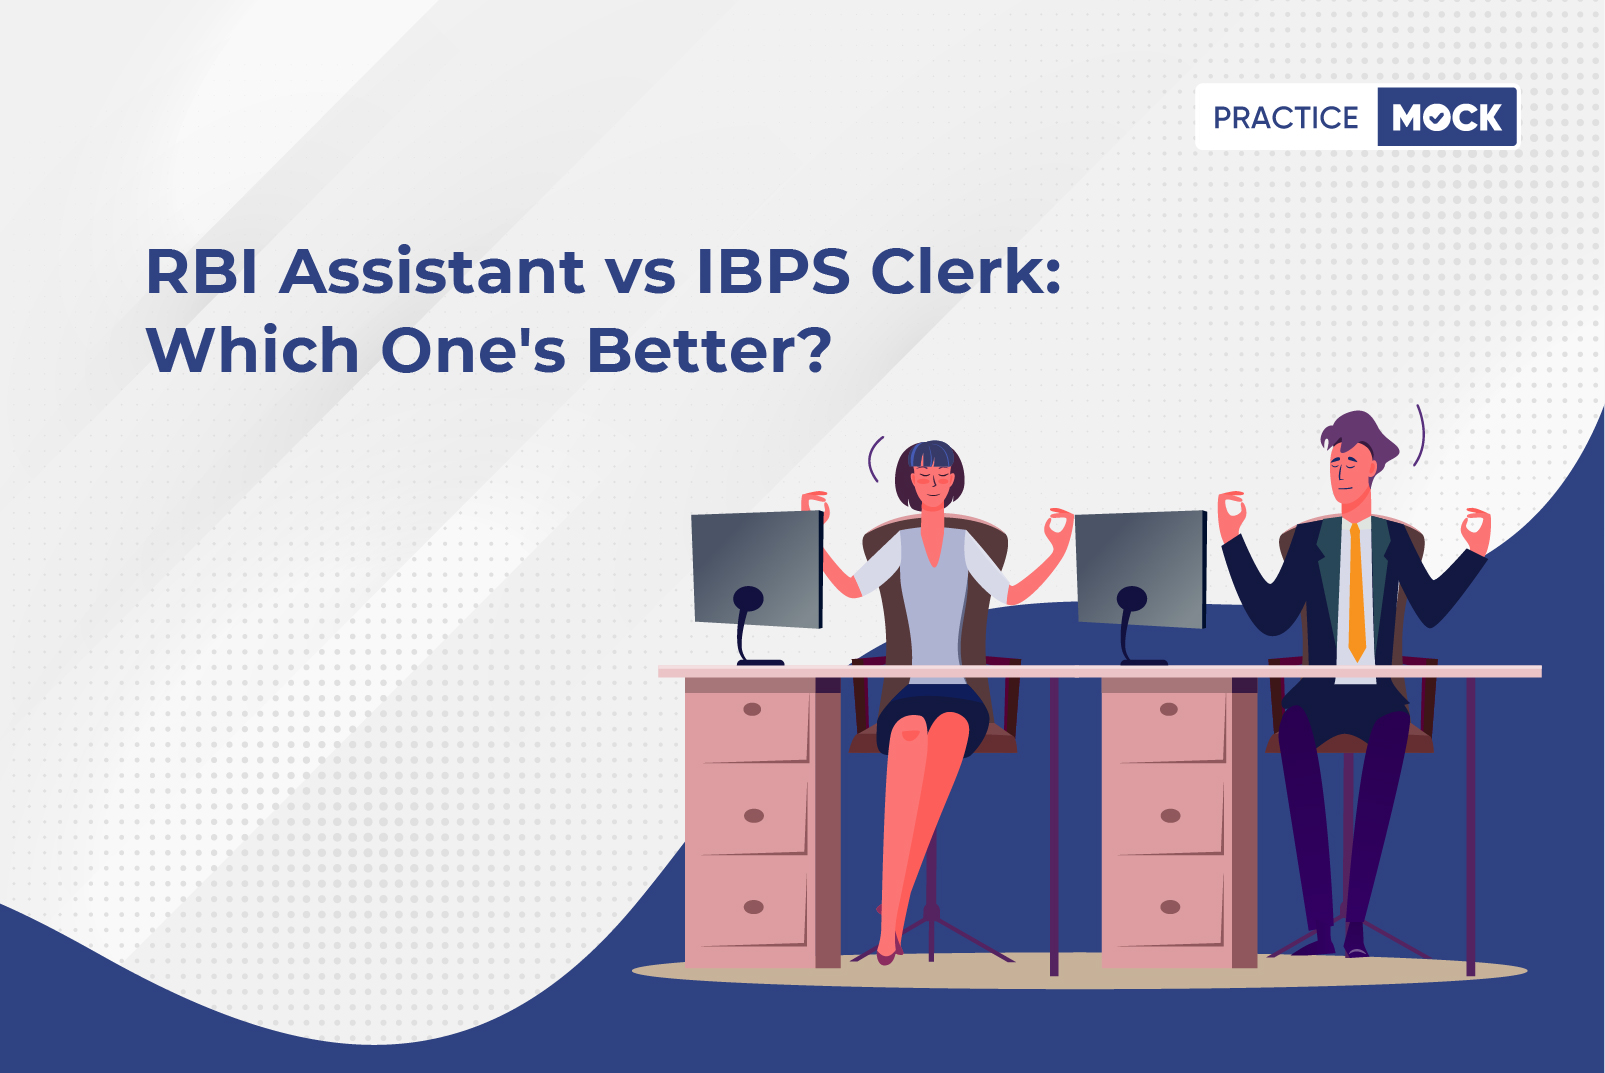 RBI Assistant vs IBPS Clerk Which one's better?